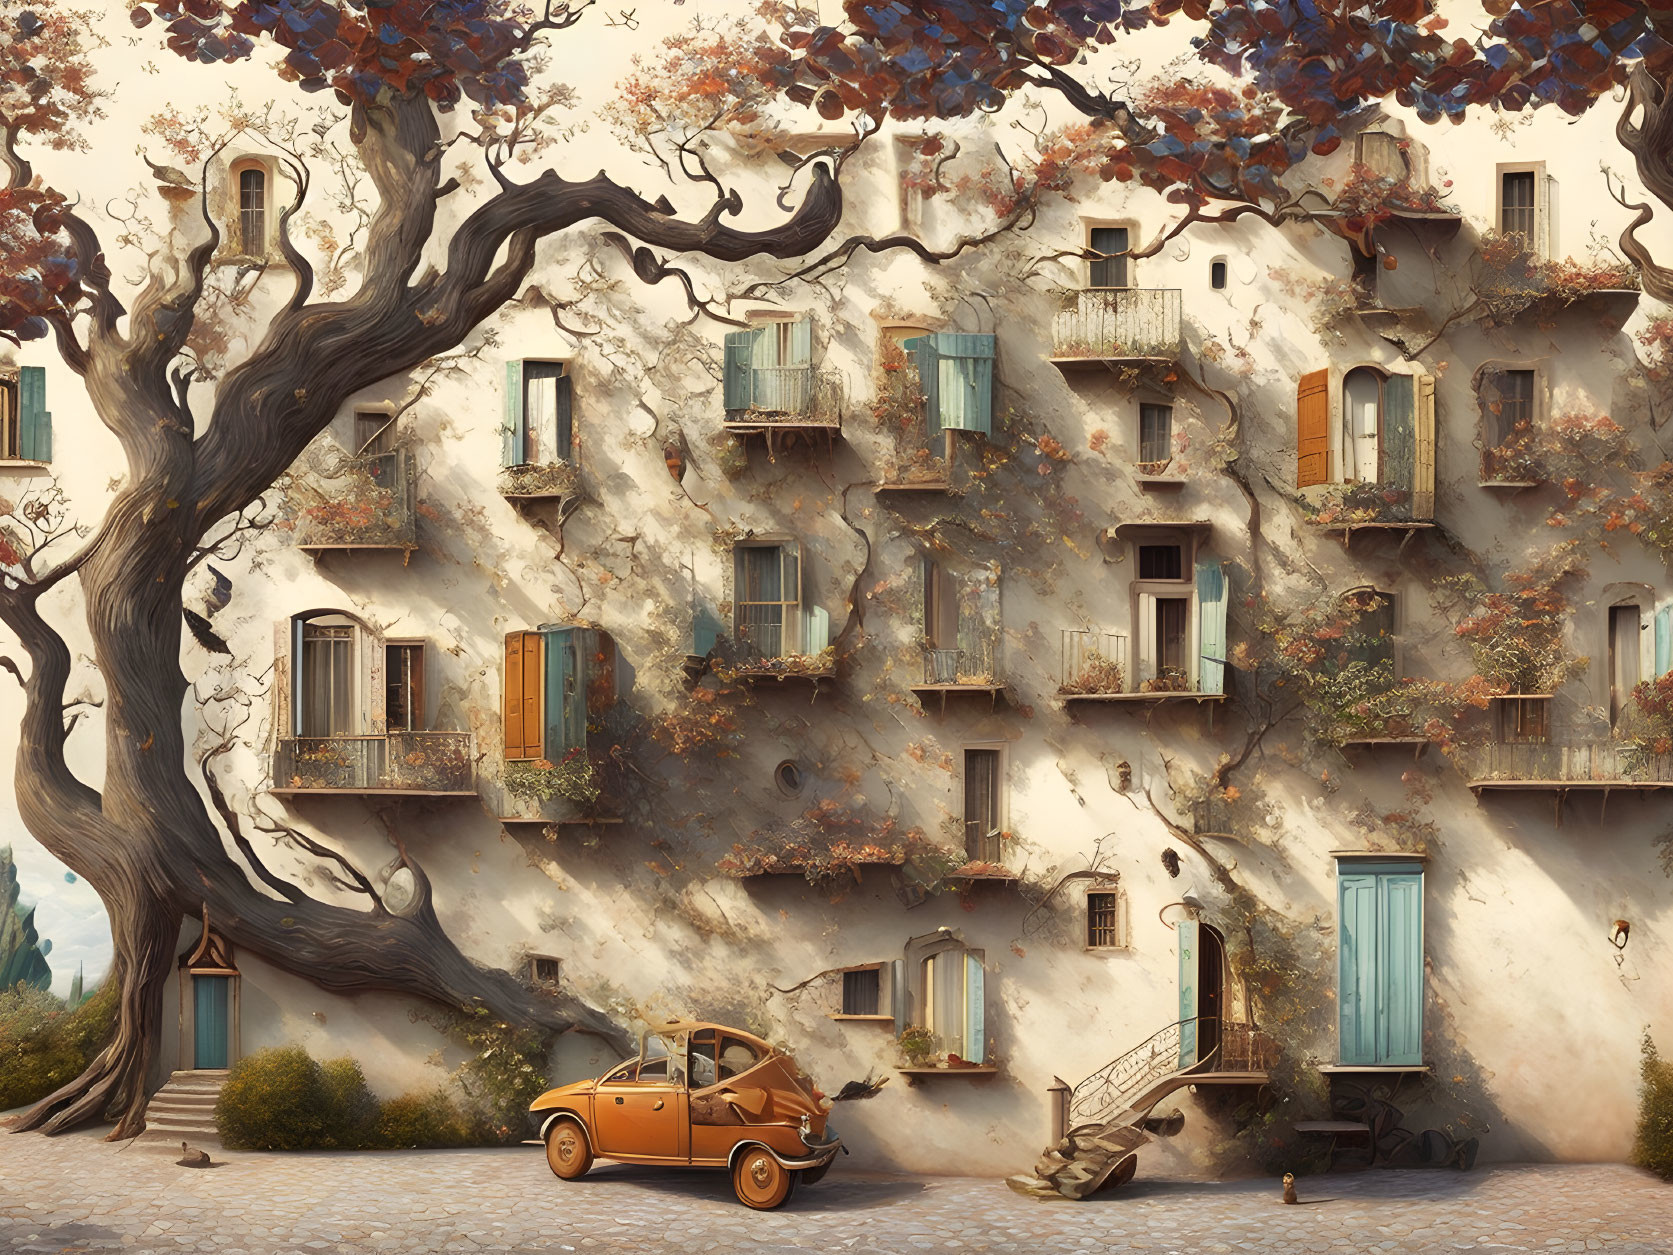 Whimsical building with vines, tree, and vintage car